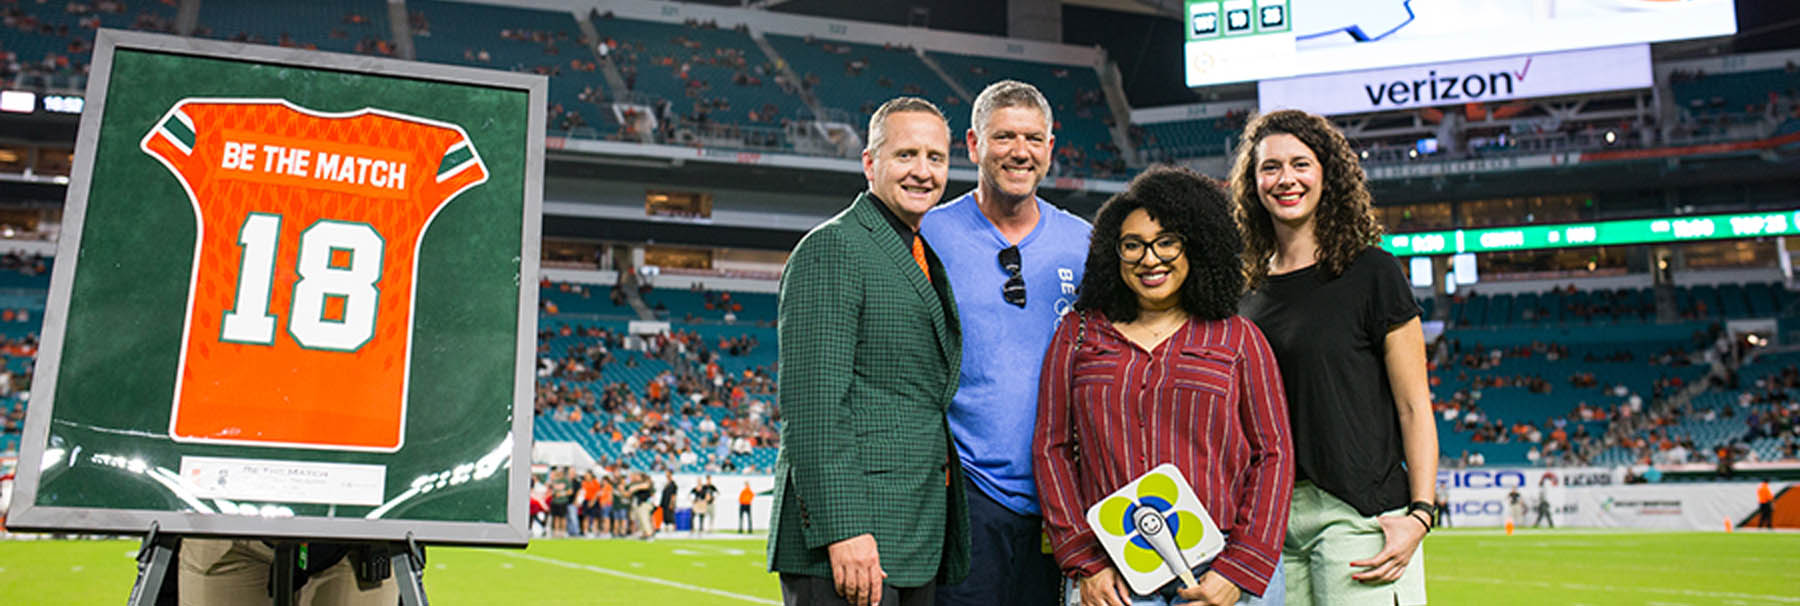 Photo of four adults standing on a football field next to a framed UM Hurricanes football jersey numbered 18 with "Be the Match" printed on it